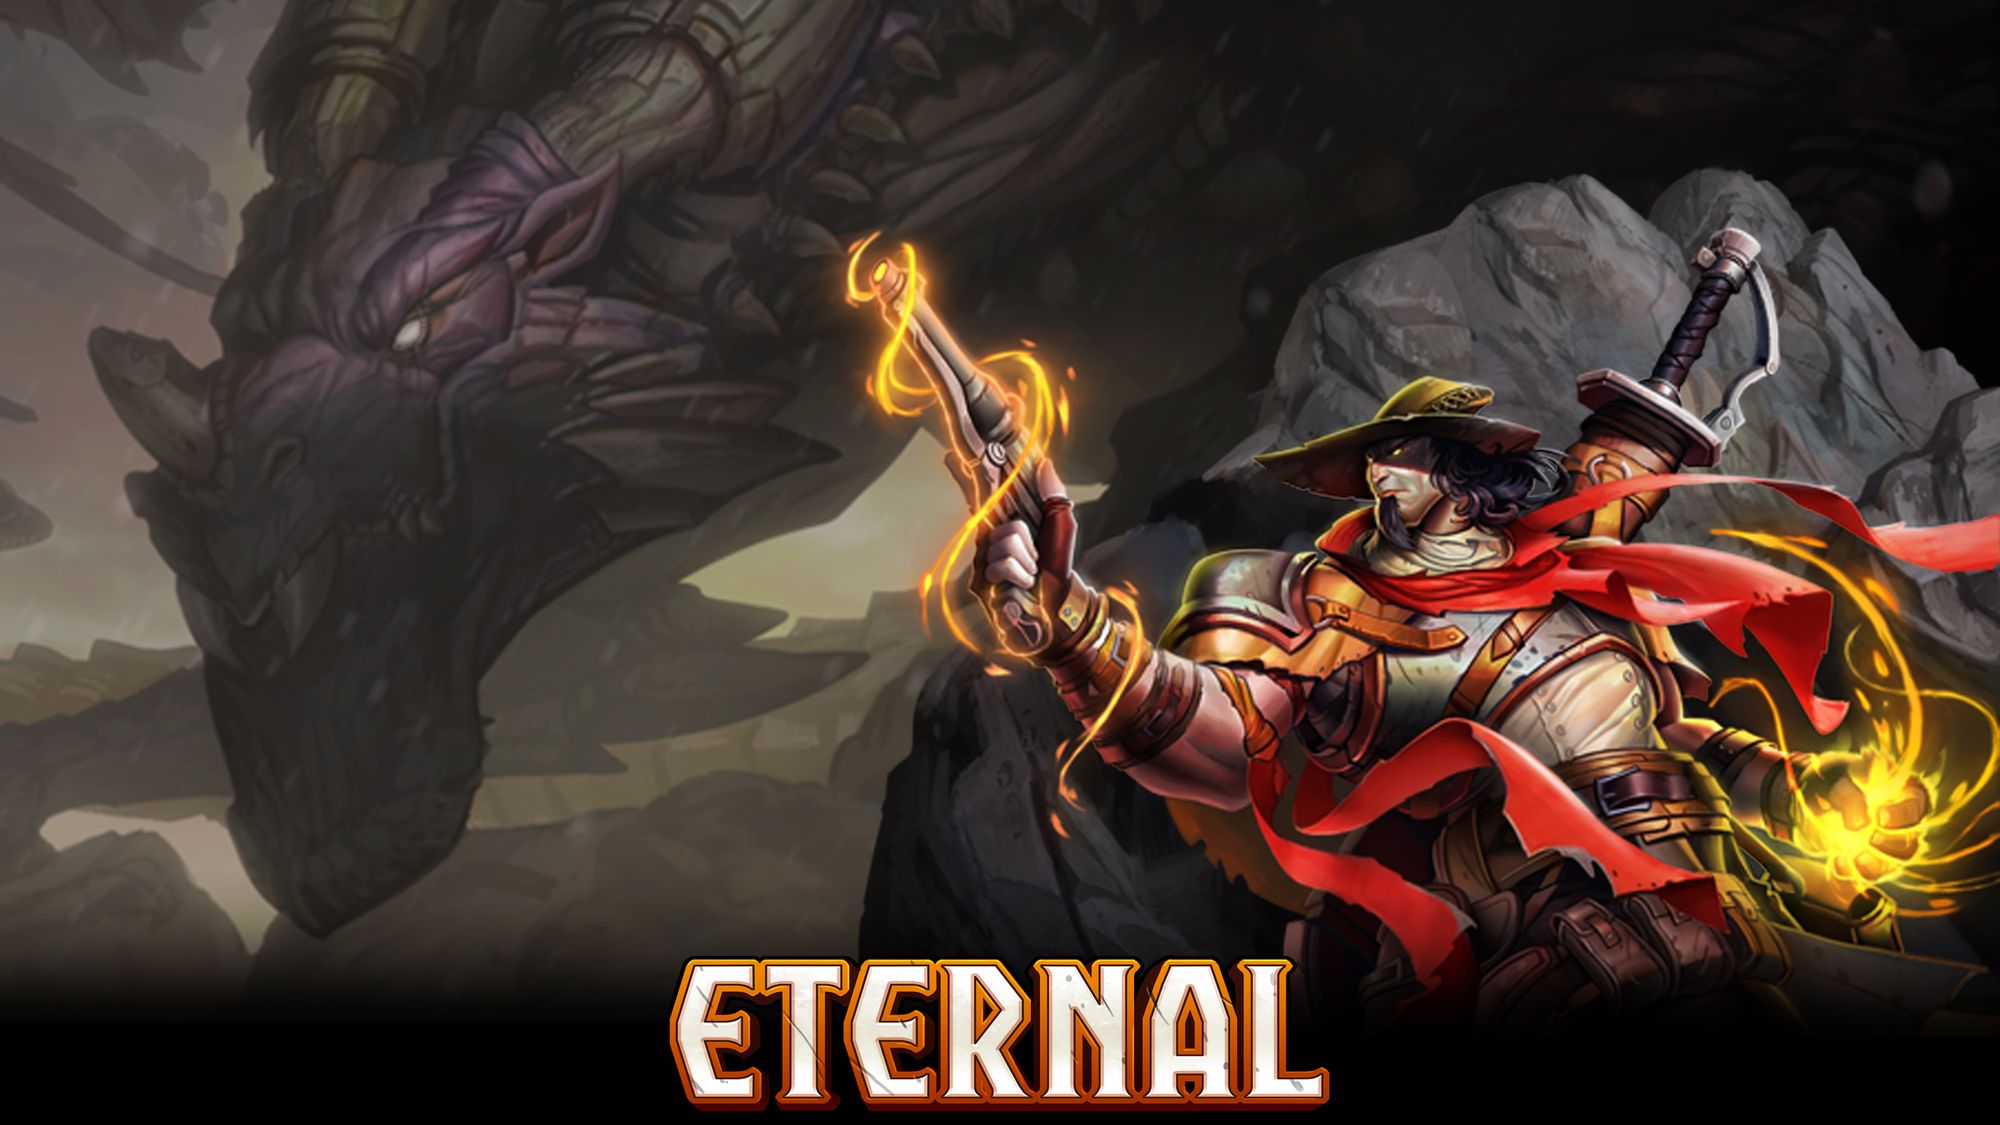 Can Dire Wolf Digital’s Eternal be the Next Hit Digital Collectible Card Game?